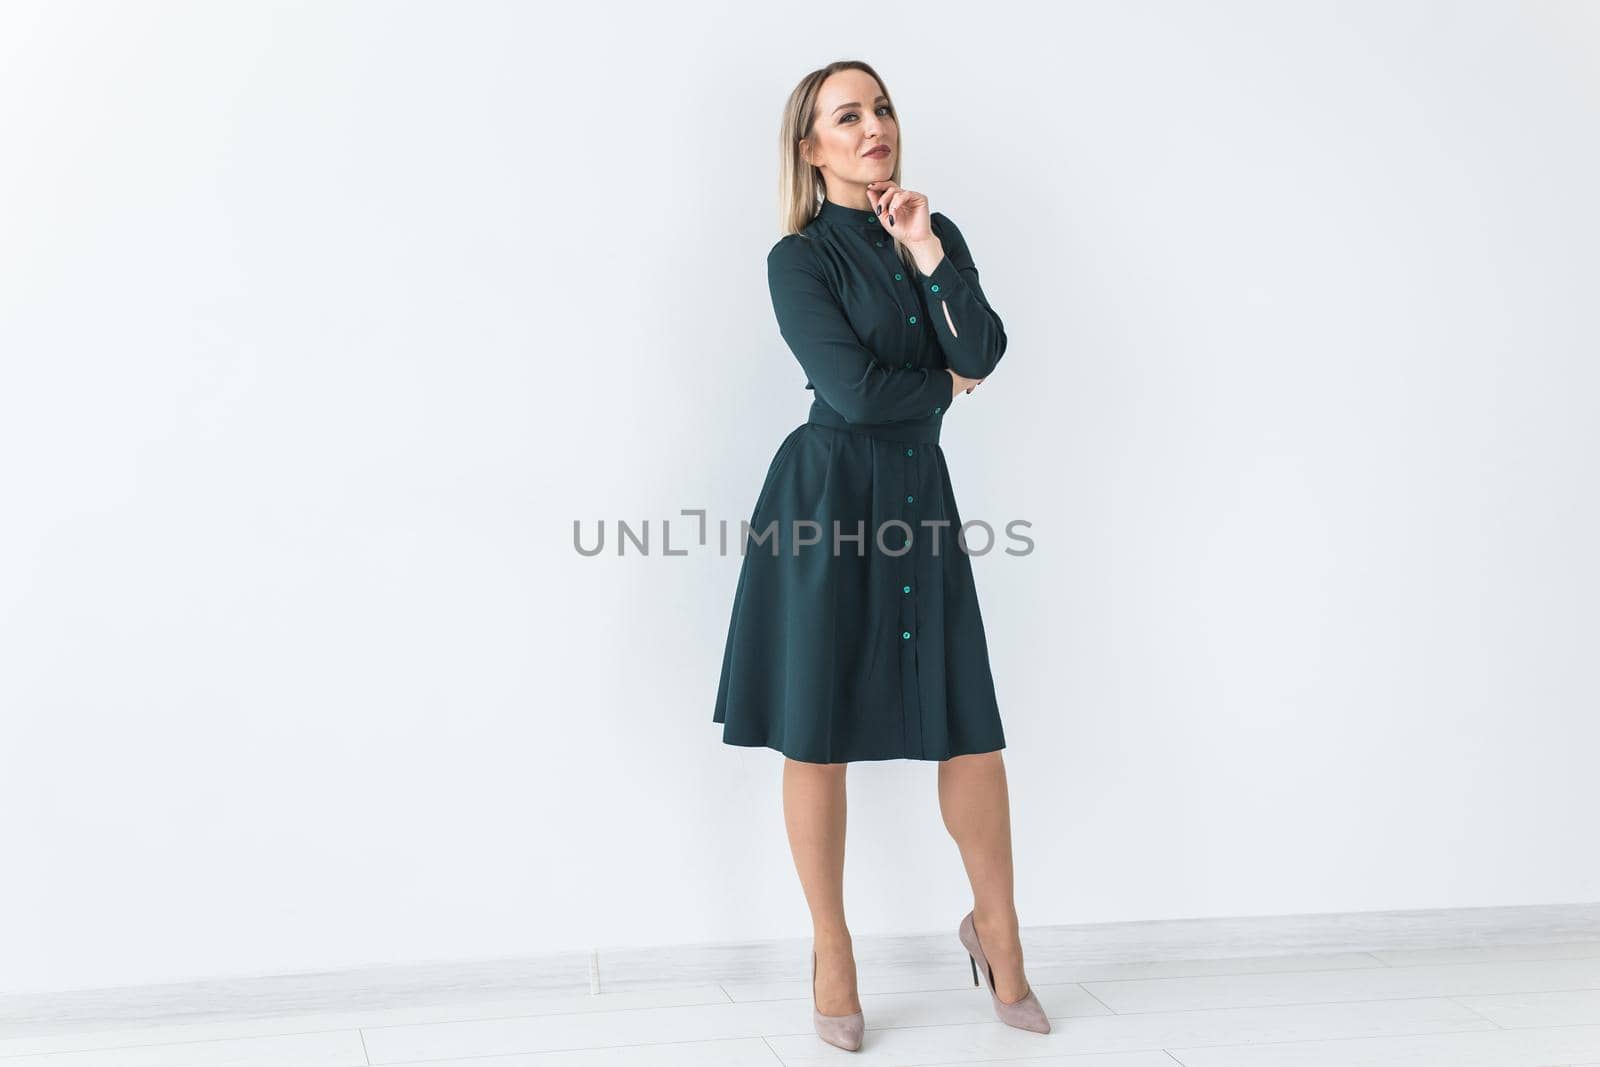 Fashionable young woman in beautiful dress posing at studio. Isolated over white.